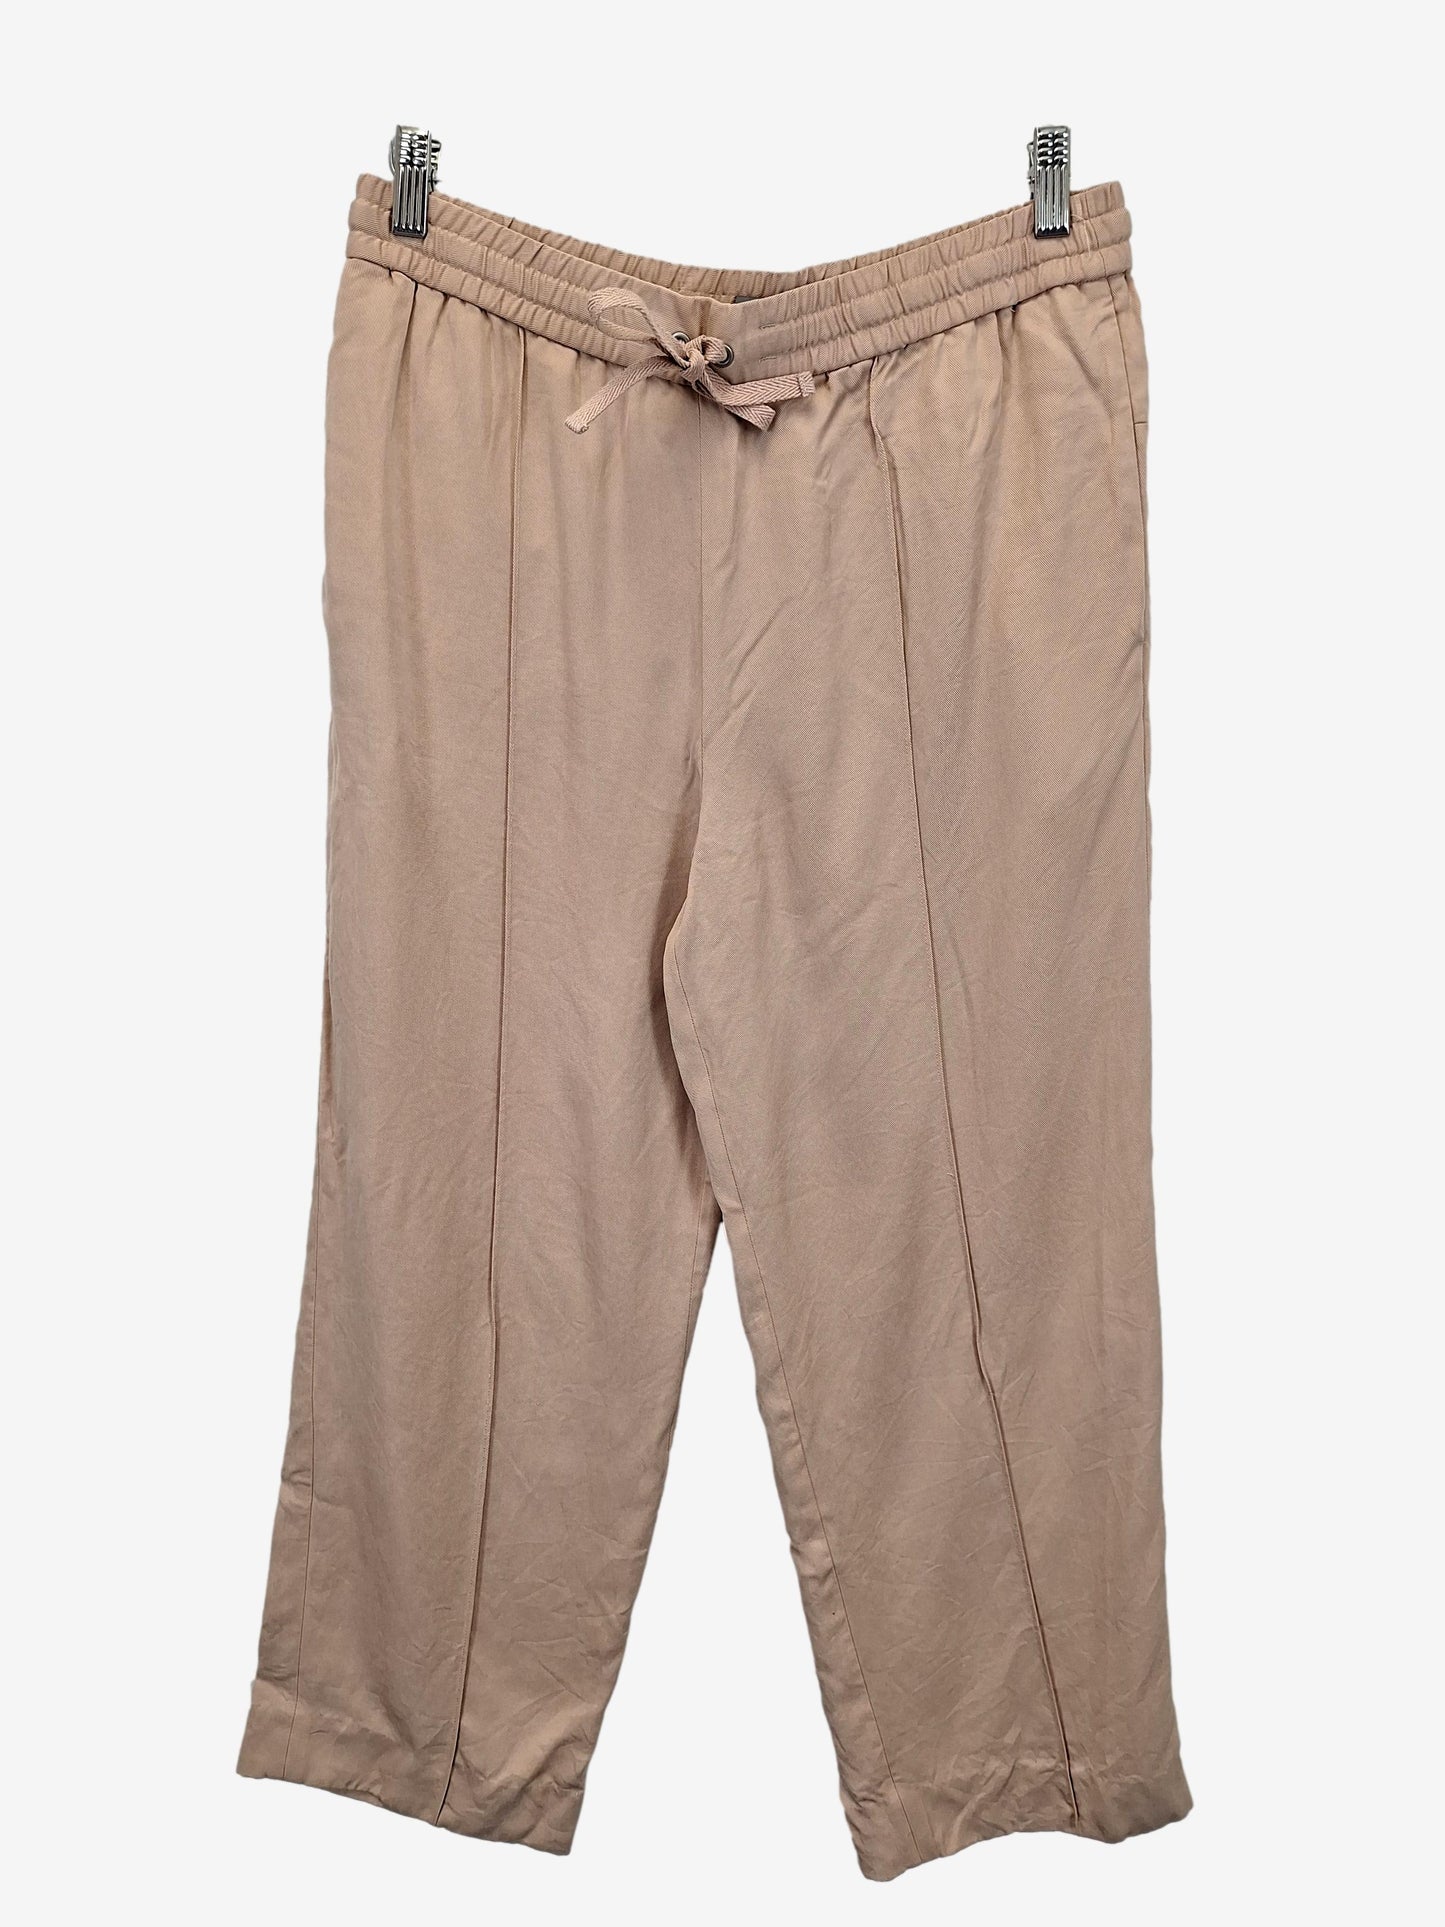 COS Blush Straight Comfy Pants Size S by SwapUp-Online Second Hand Store-Online Thrift Store